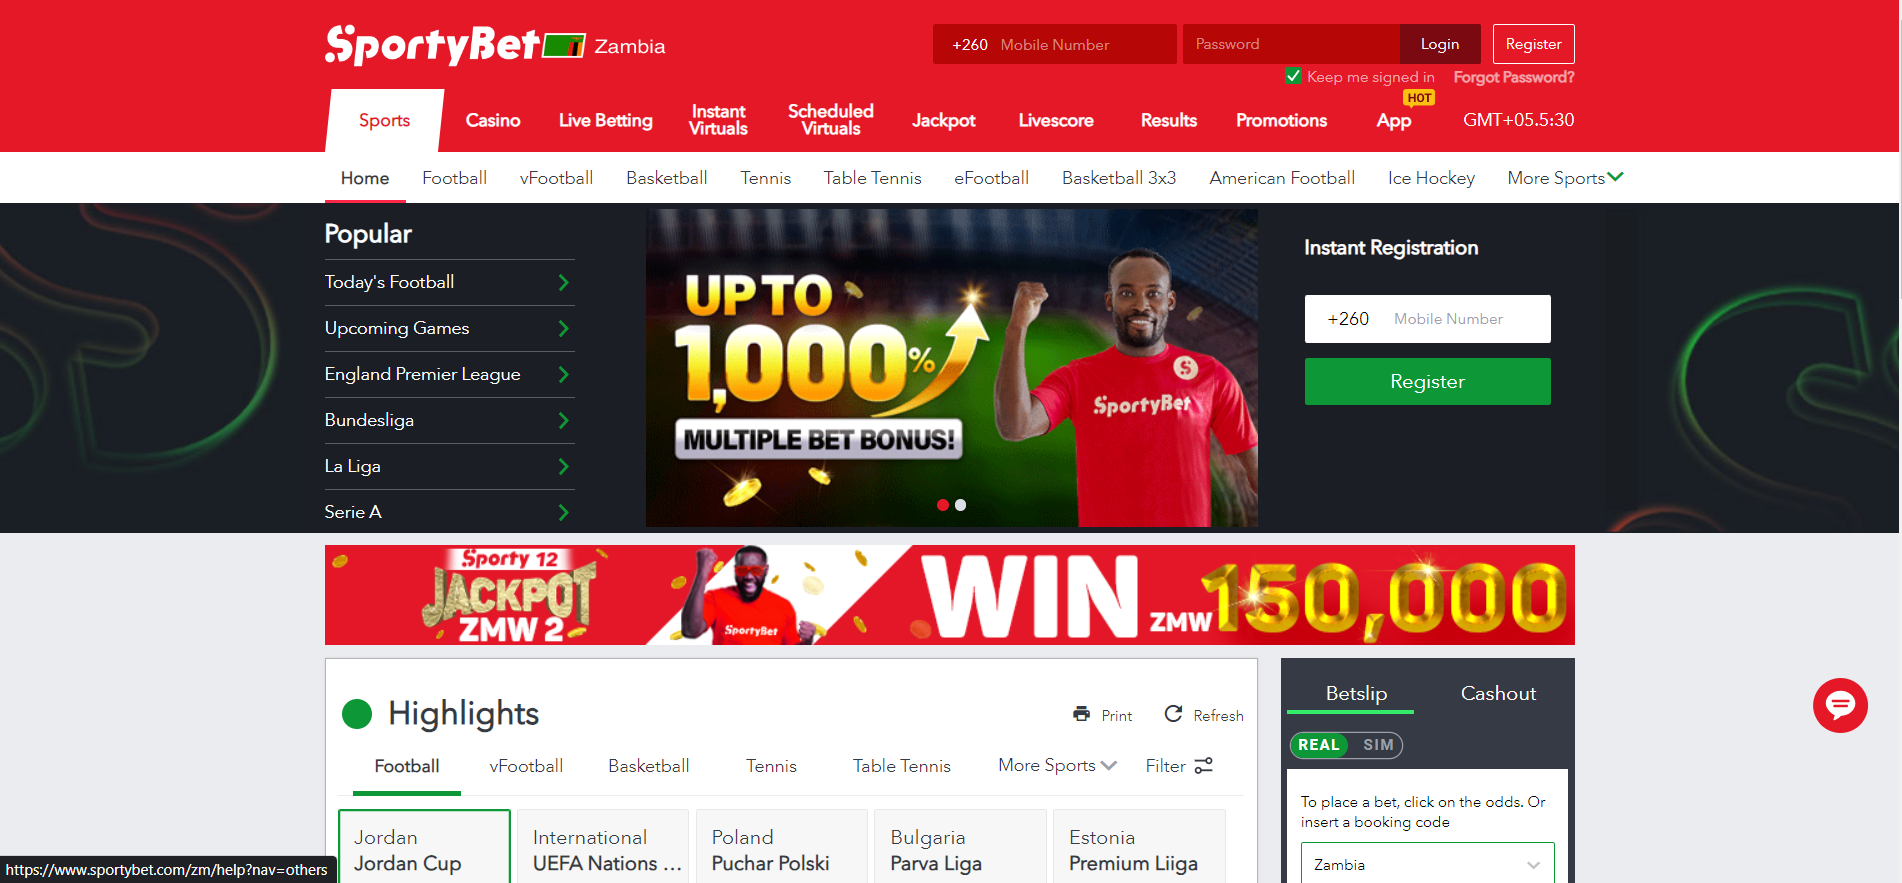 Image for sportybet sportsbook homepage